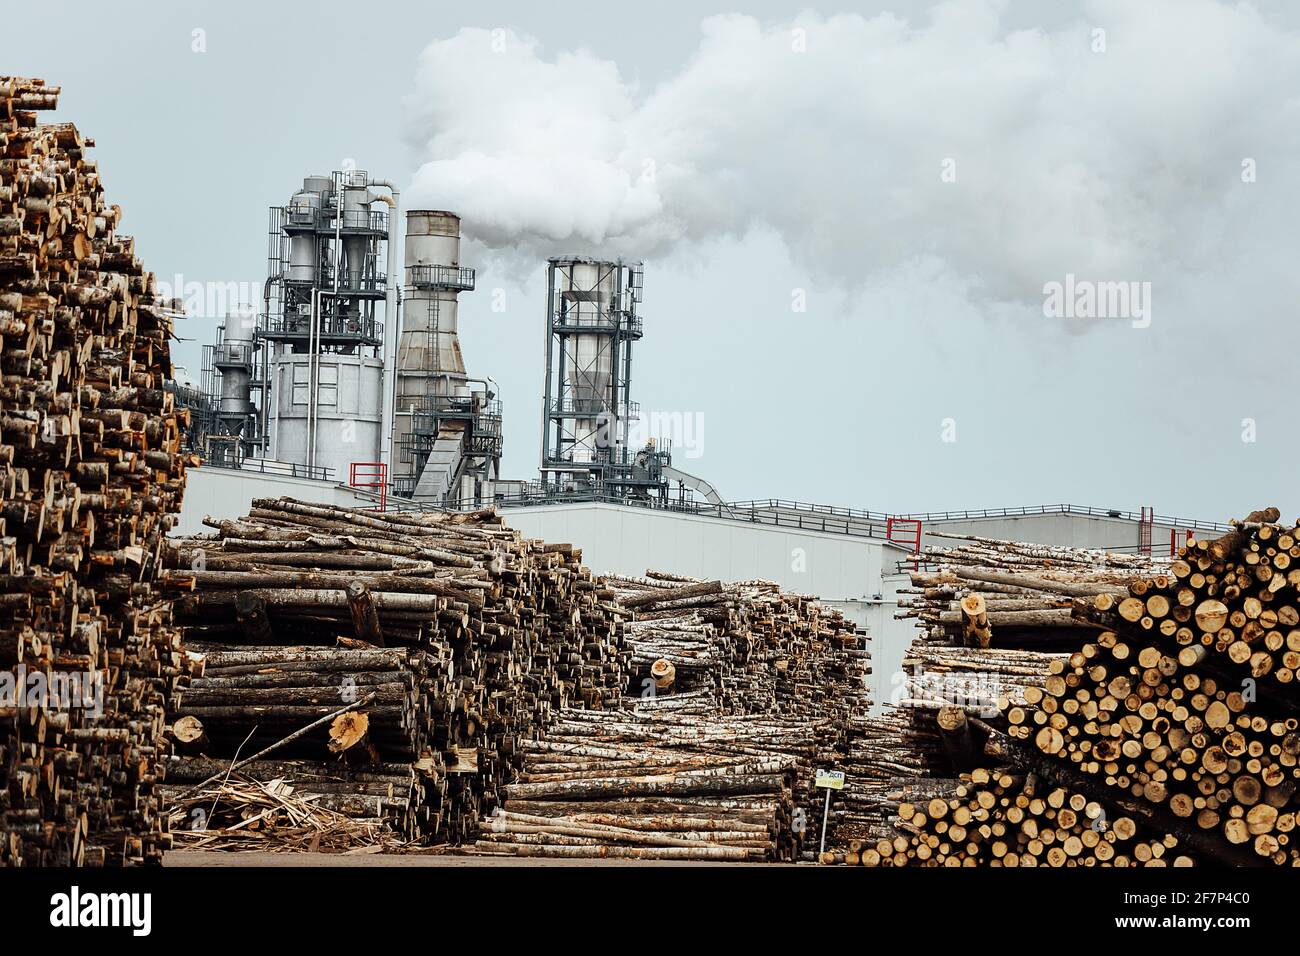 warehouse of felled trees at the factory. smoking factory chimneys pollute the atmosphere. the woodworking enterprise destroys forests and harms Stock Photo